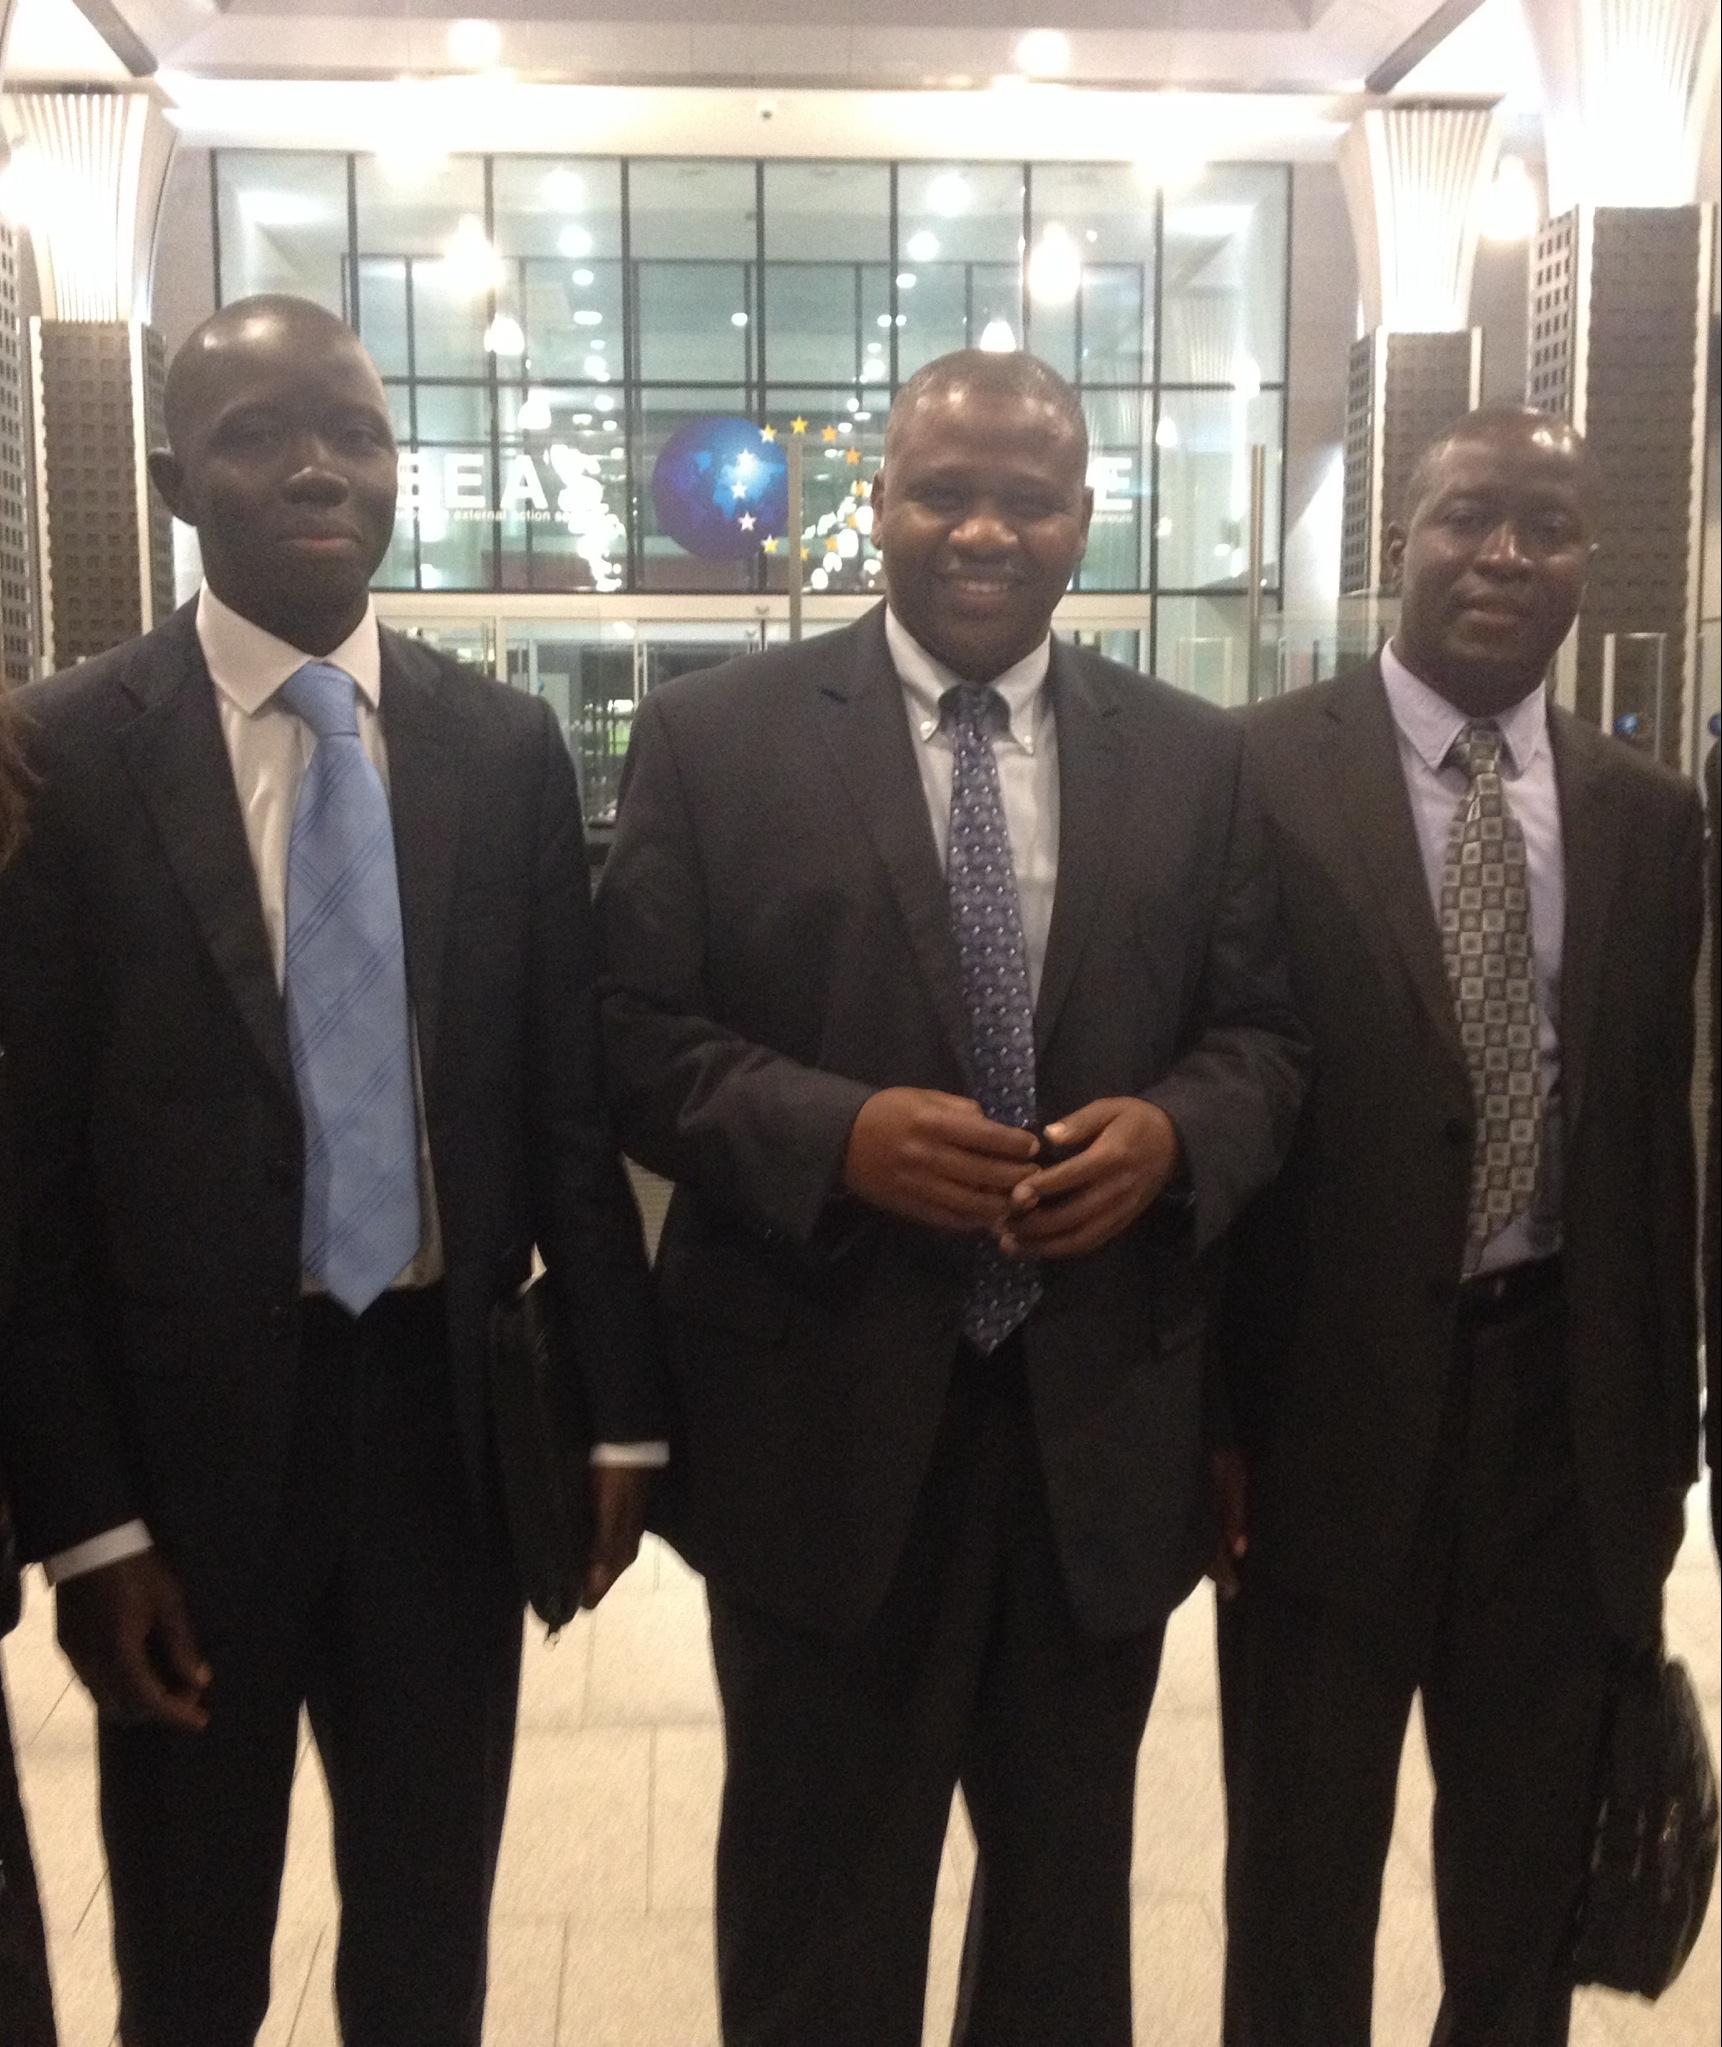 Amadou, Alieu and Banka in Brussels